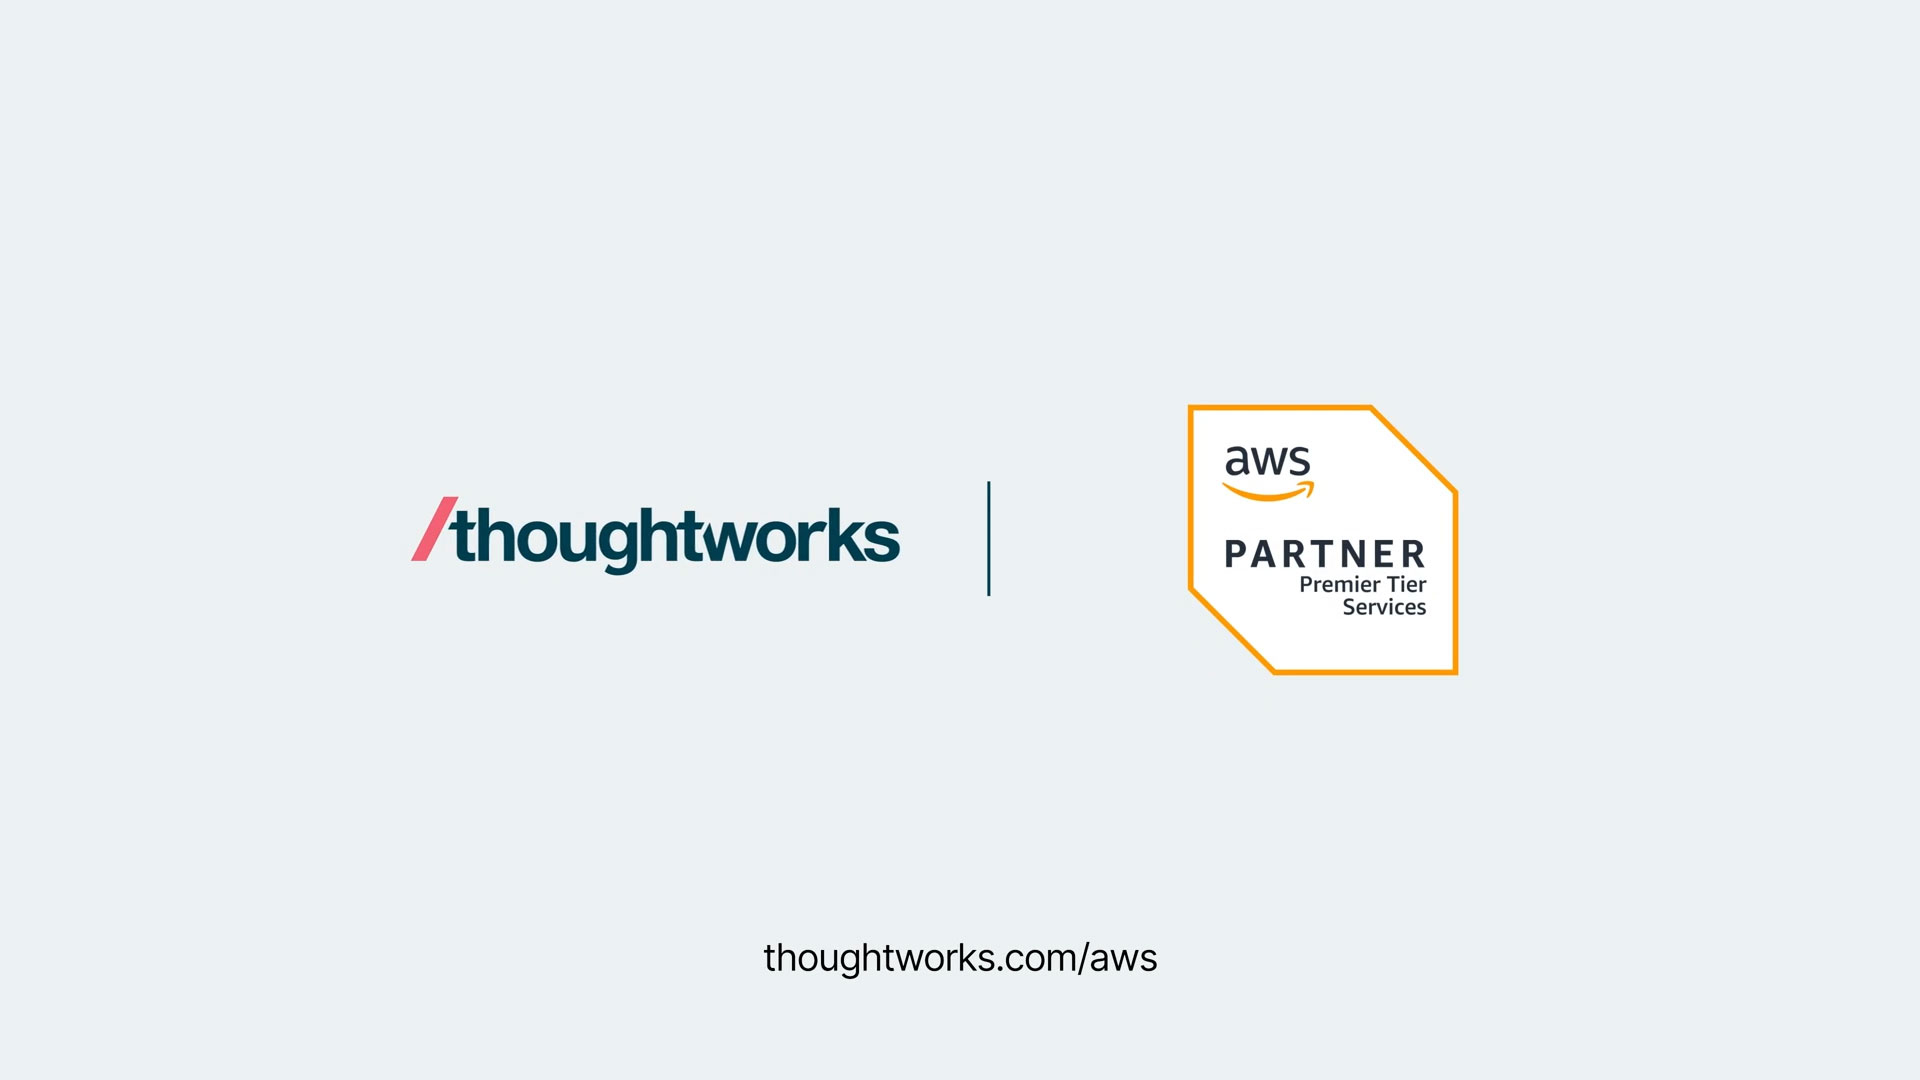 Thoughtworks is now an Amazon Web Services (AWS) Premier Tier Services Partner in the AWS Partner Network (APN). Thoughtworks has been helping clients migrate to AWS since 2006. Thoughtworks has earned the AWS Migration Consulting Competency, AWS Government Consulting Competency, AWS Financial Services Consulting Competency and AWS DevOps Consulting Competency.